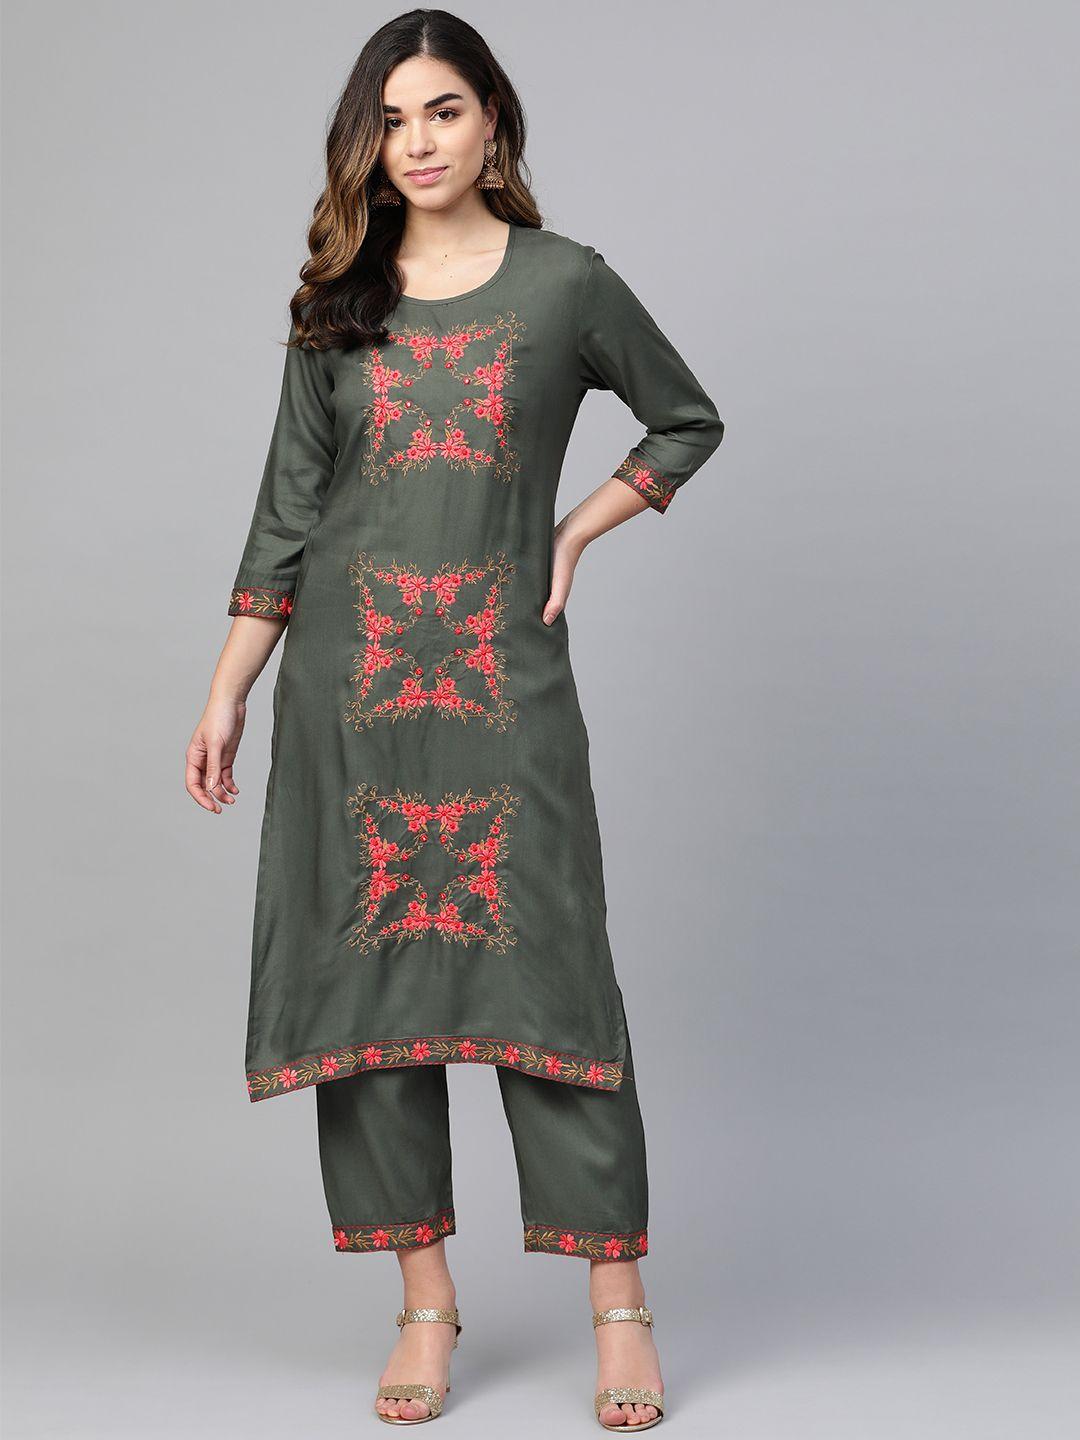 anubhutee-women-charcoal-grey-&-pink-embroidered-kurta-with-trousers